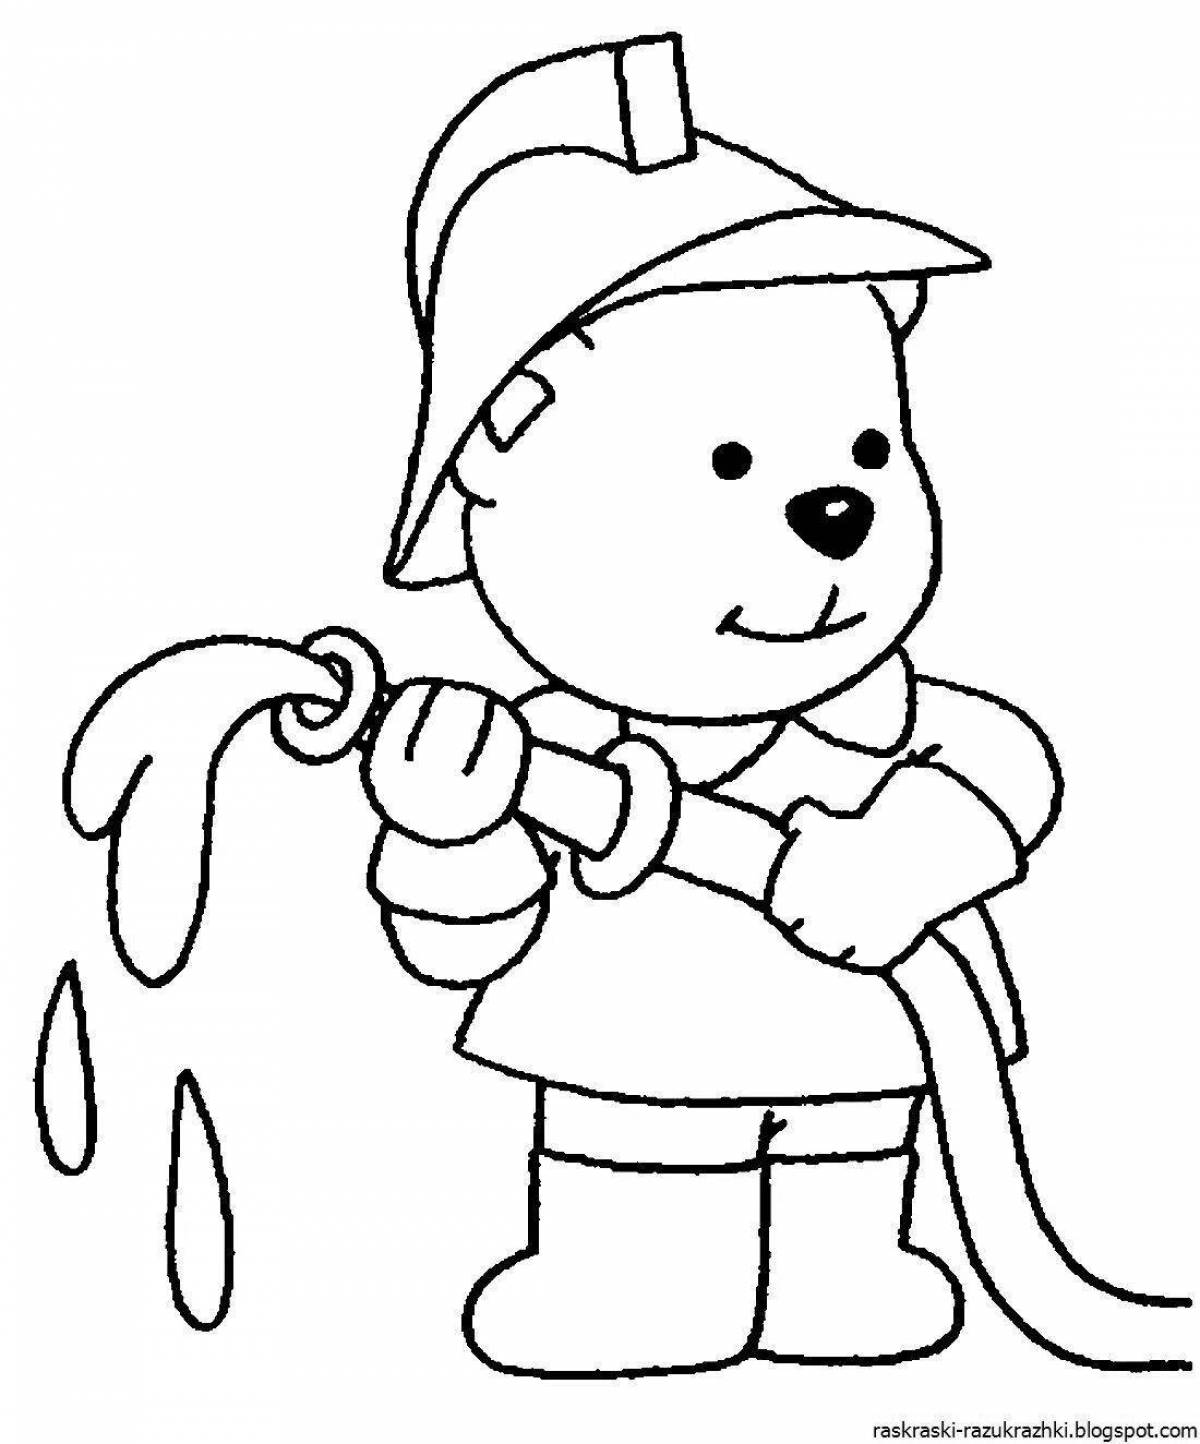 Bold firefighter coloring page for kids